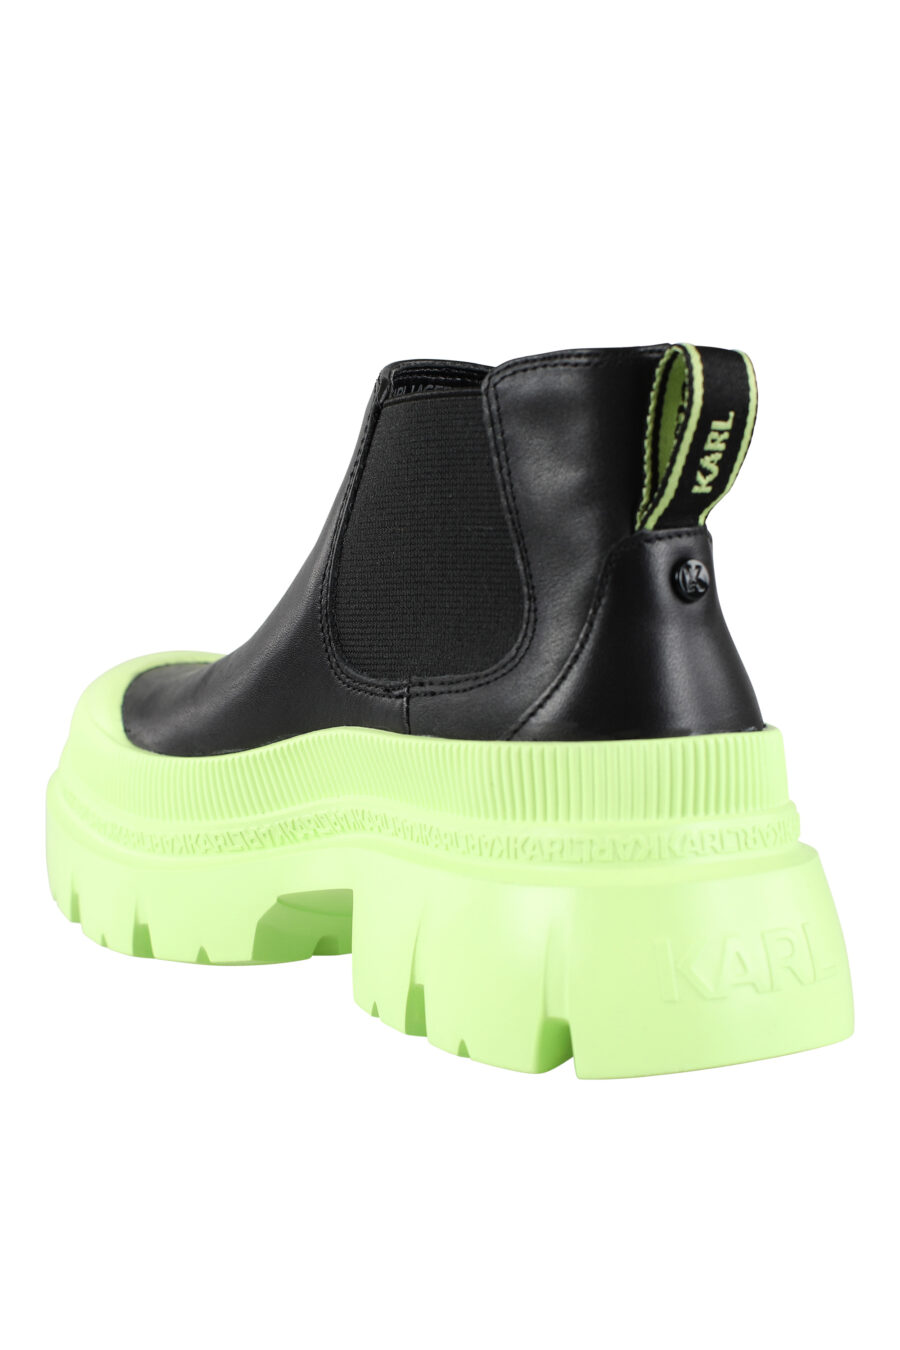 Black ankle boots with logo and lime green sole - IMG 9592